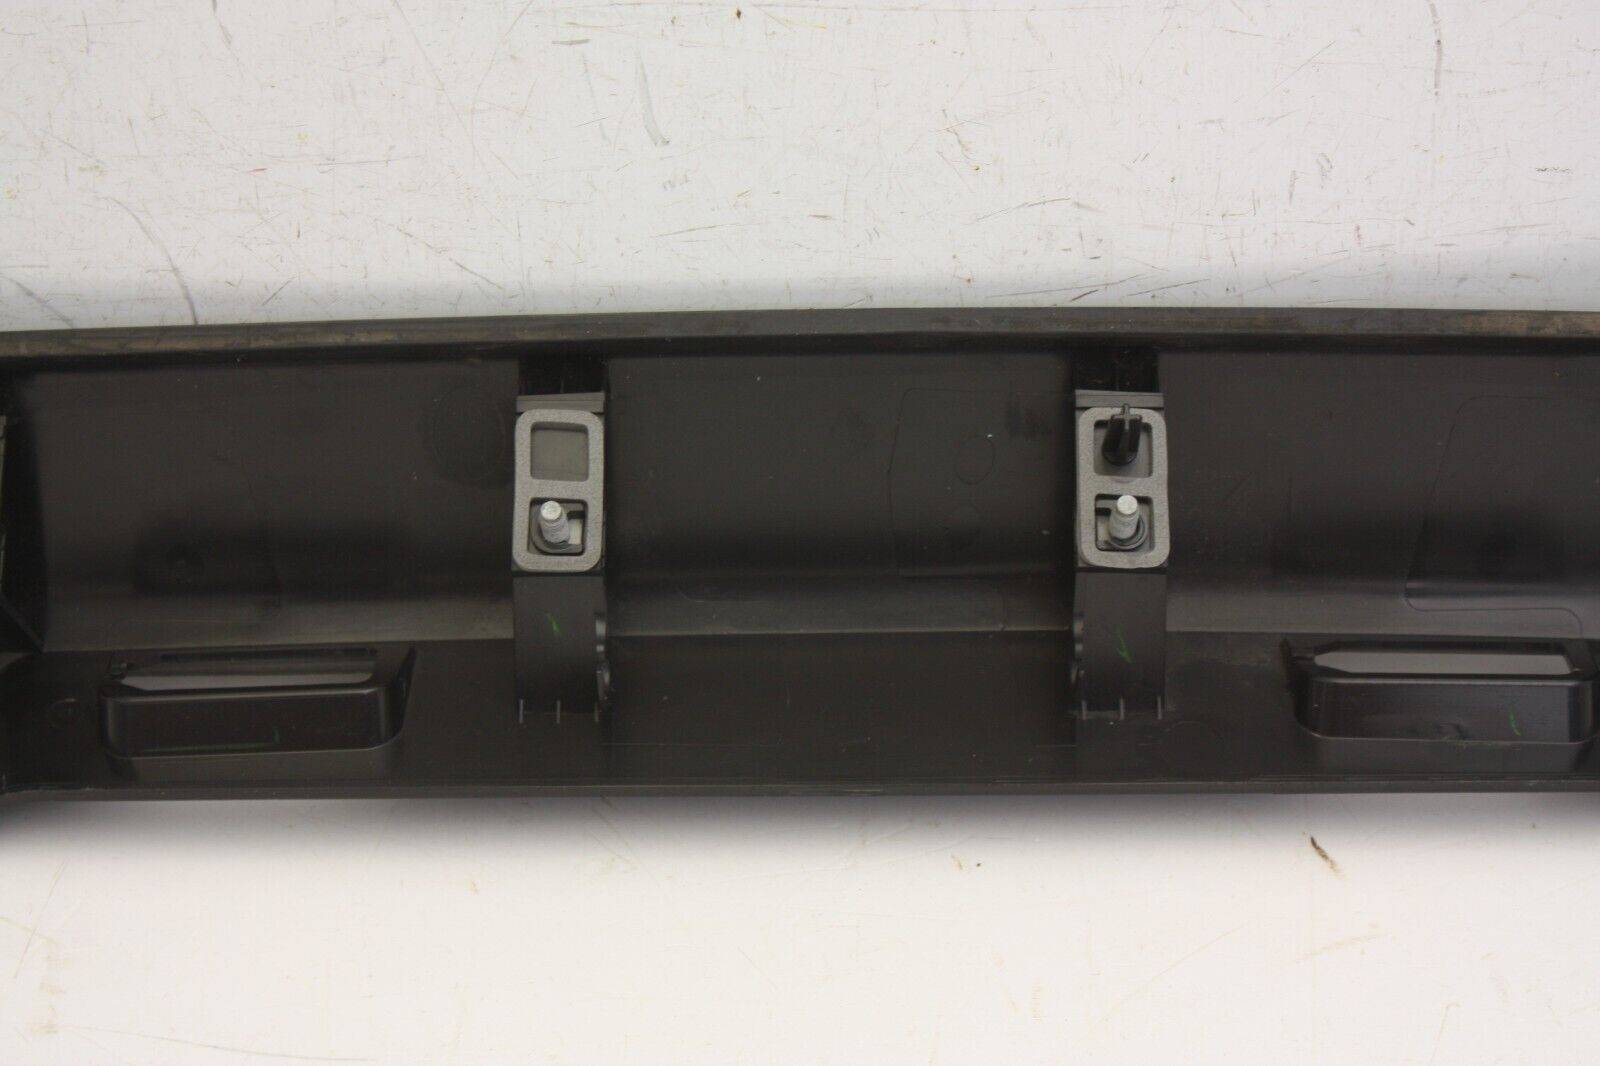 Ford-Transit-Custom-Tailgate-Lid-Cover-Recording-Bar-2018-ON-BK21-13555-AFW-176302846649-14